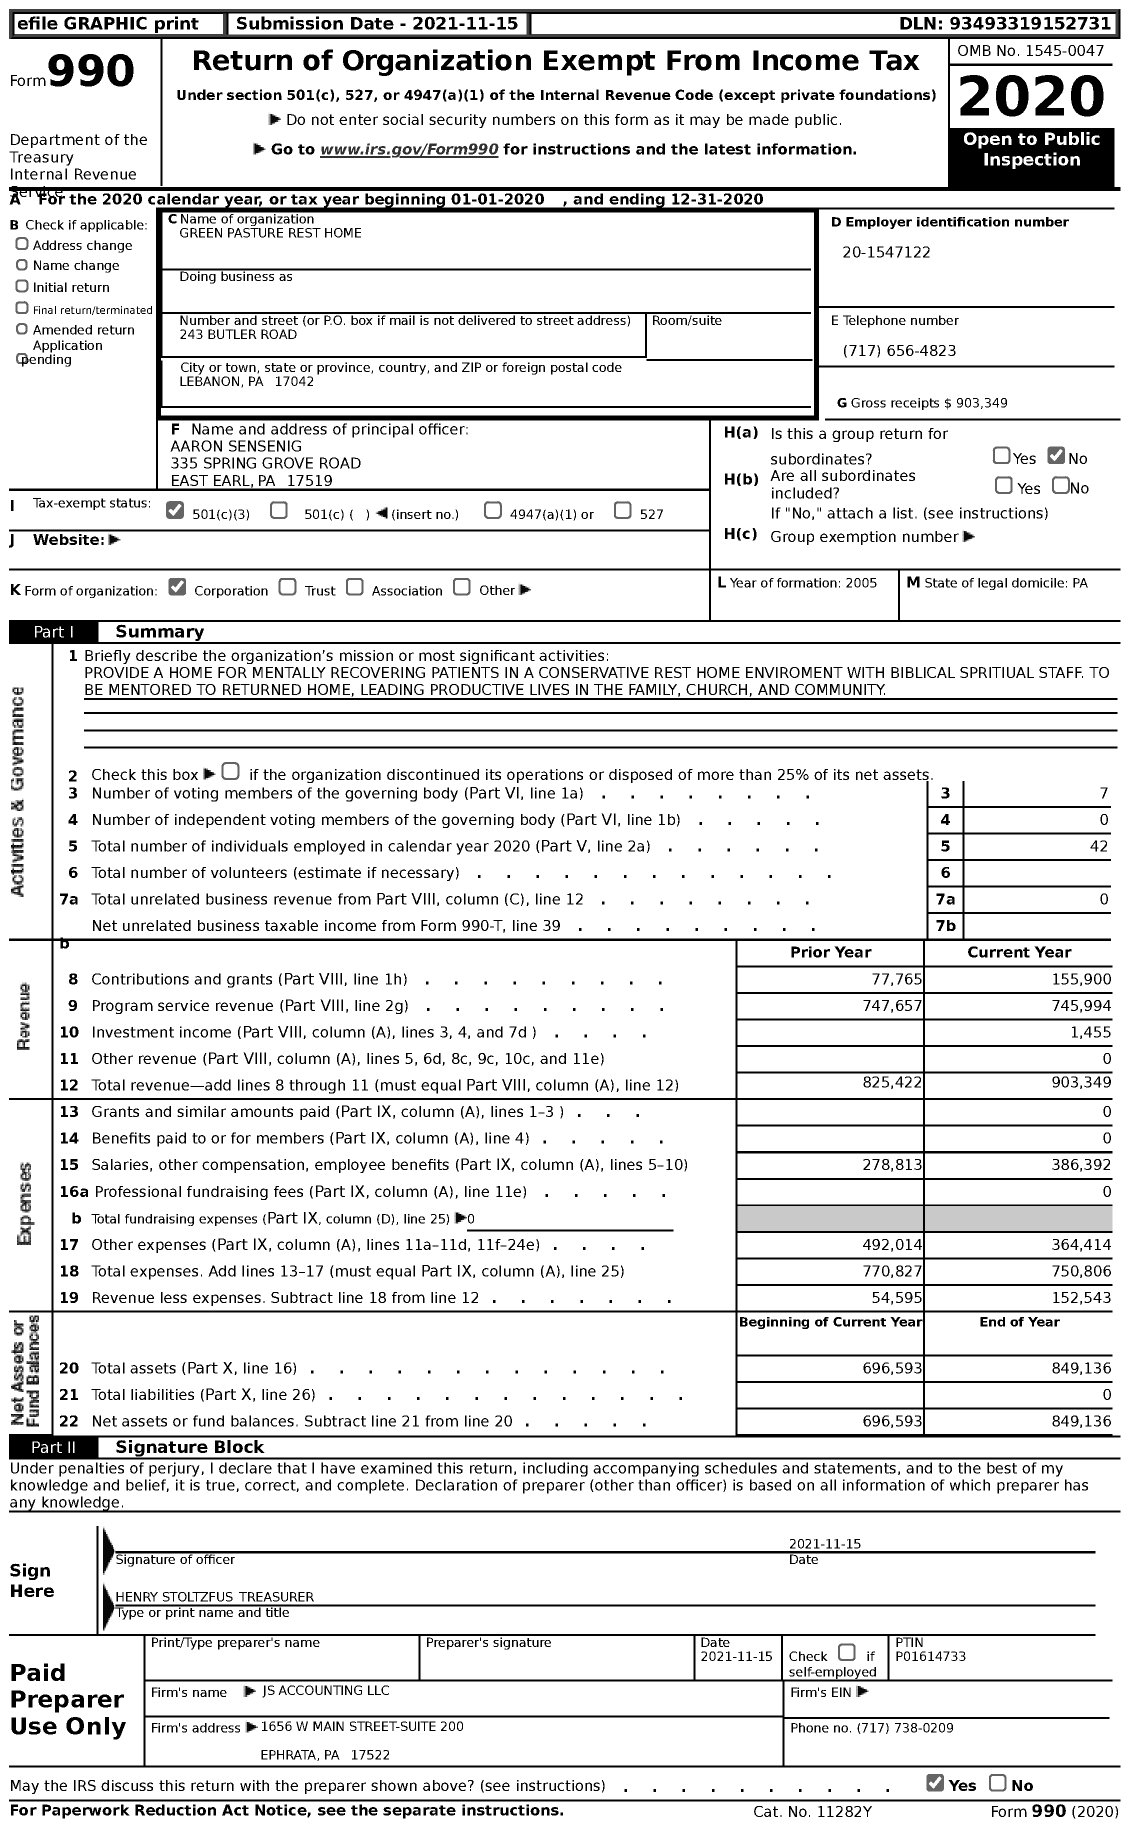 Image of first page of 2020 Form 990 for Green Pasture Rest Home